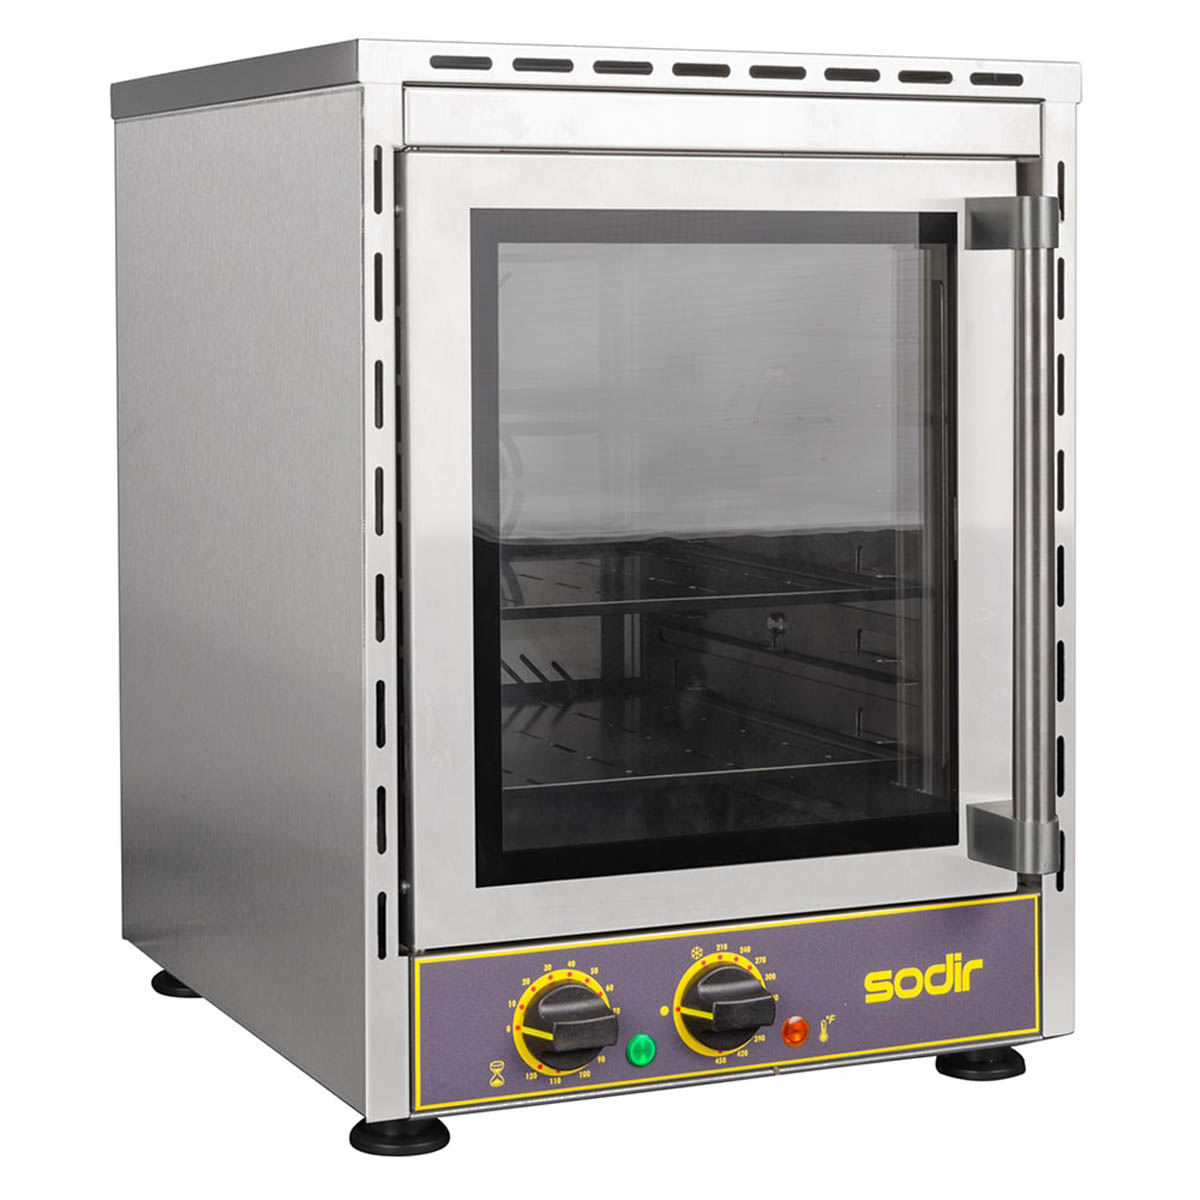 Equipex FC-280V/1 Single-Deck Electric Convection Oven w/ Thermostatic Controls, Quarter-Size